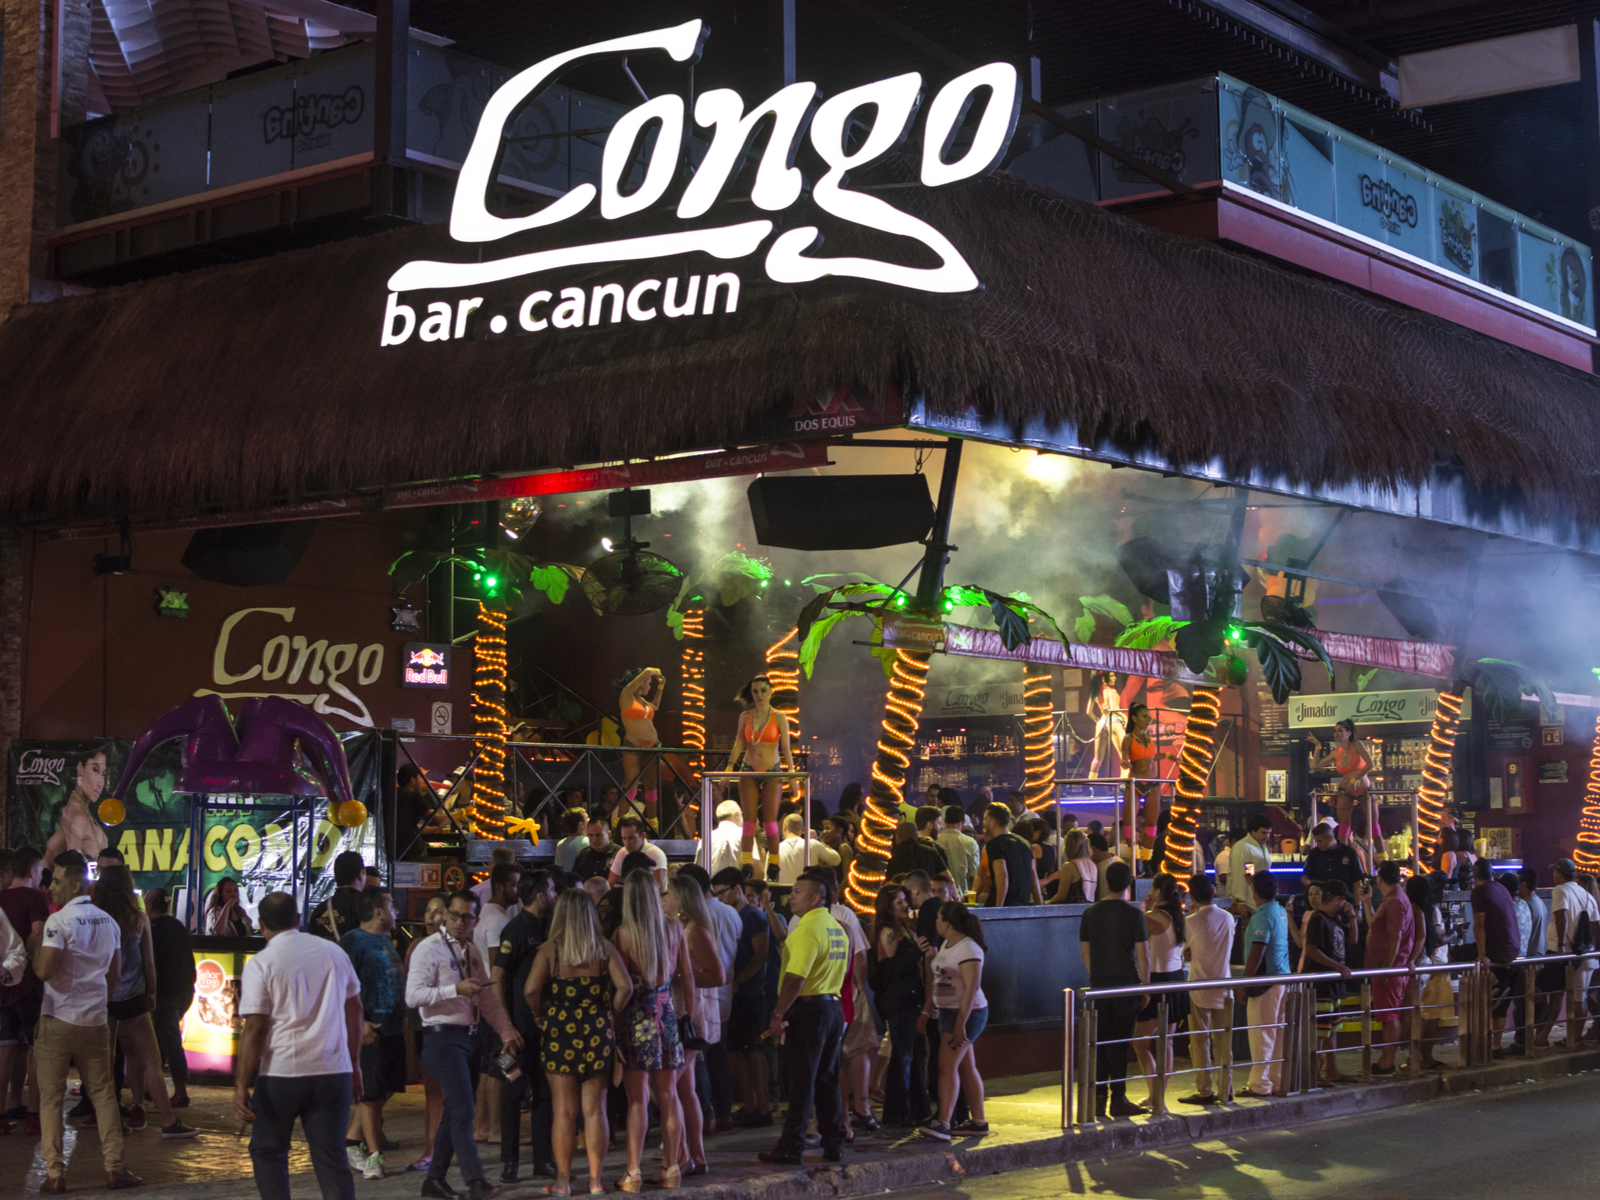 A busy night at Congo Bar Cancun, a place to visit and one of the best clubs in Cancun, where large crowd is partying together with ladies on a platform dancing in their sexy get up